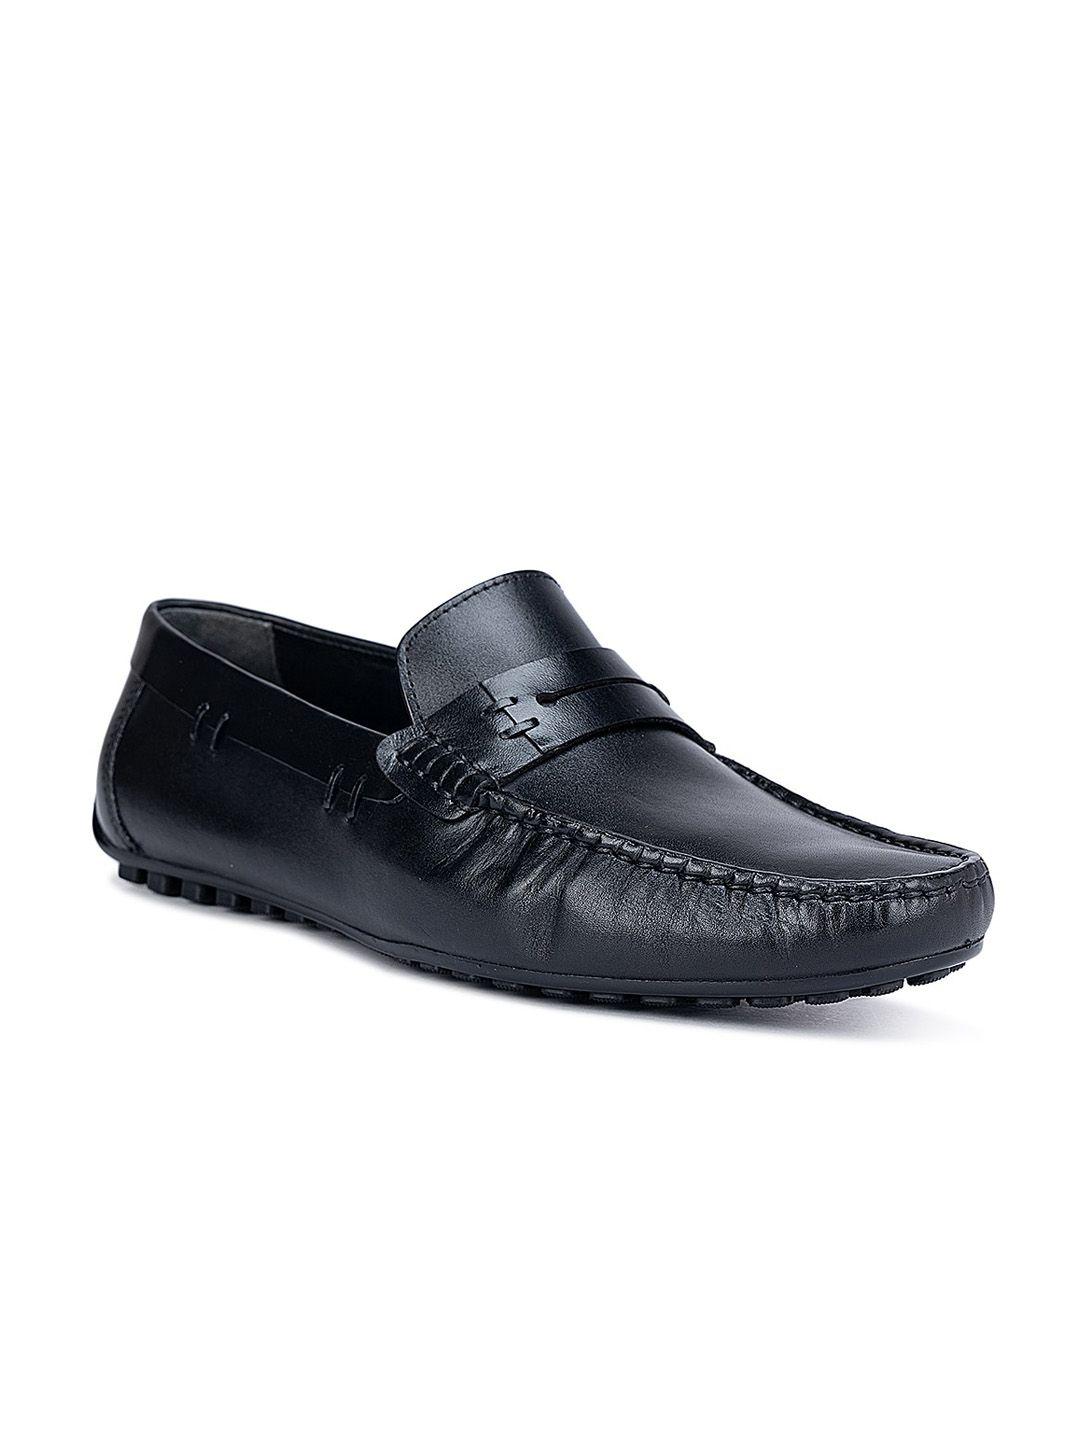 ROSSO BRUNELLO Men Textured Leather Formal Slip On Shoes